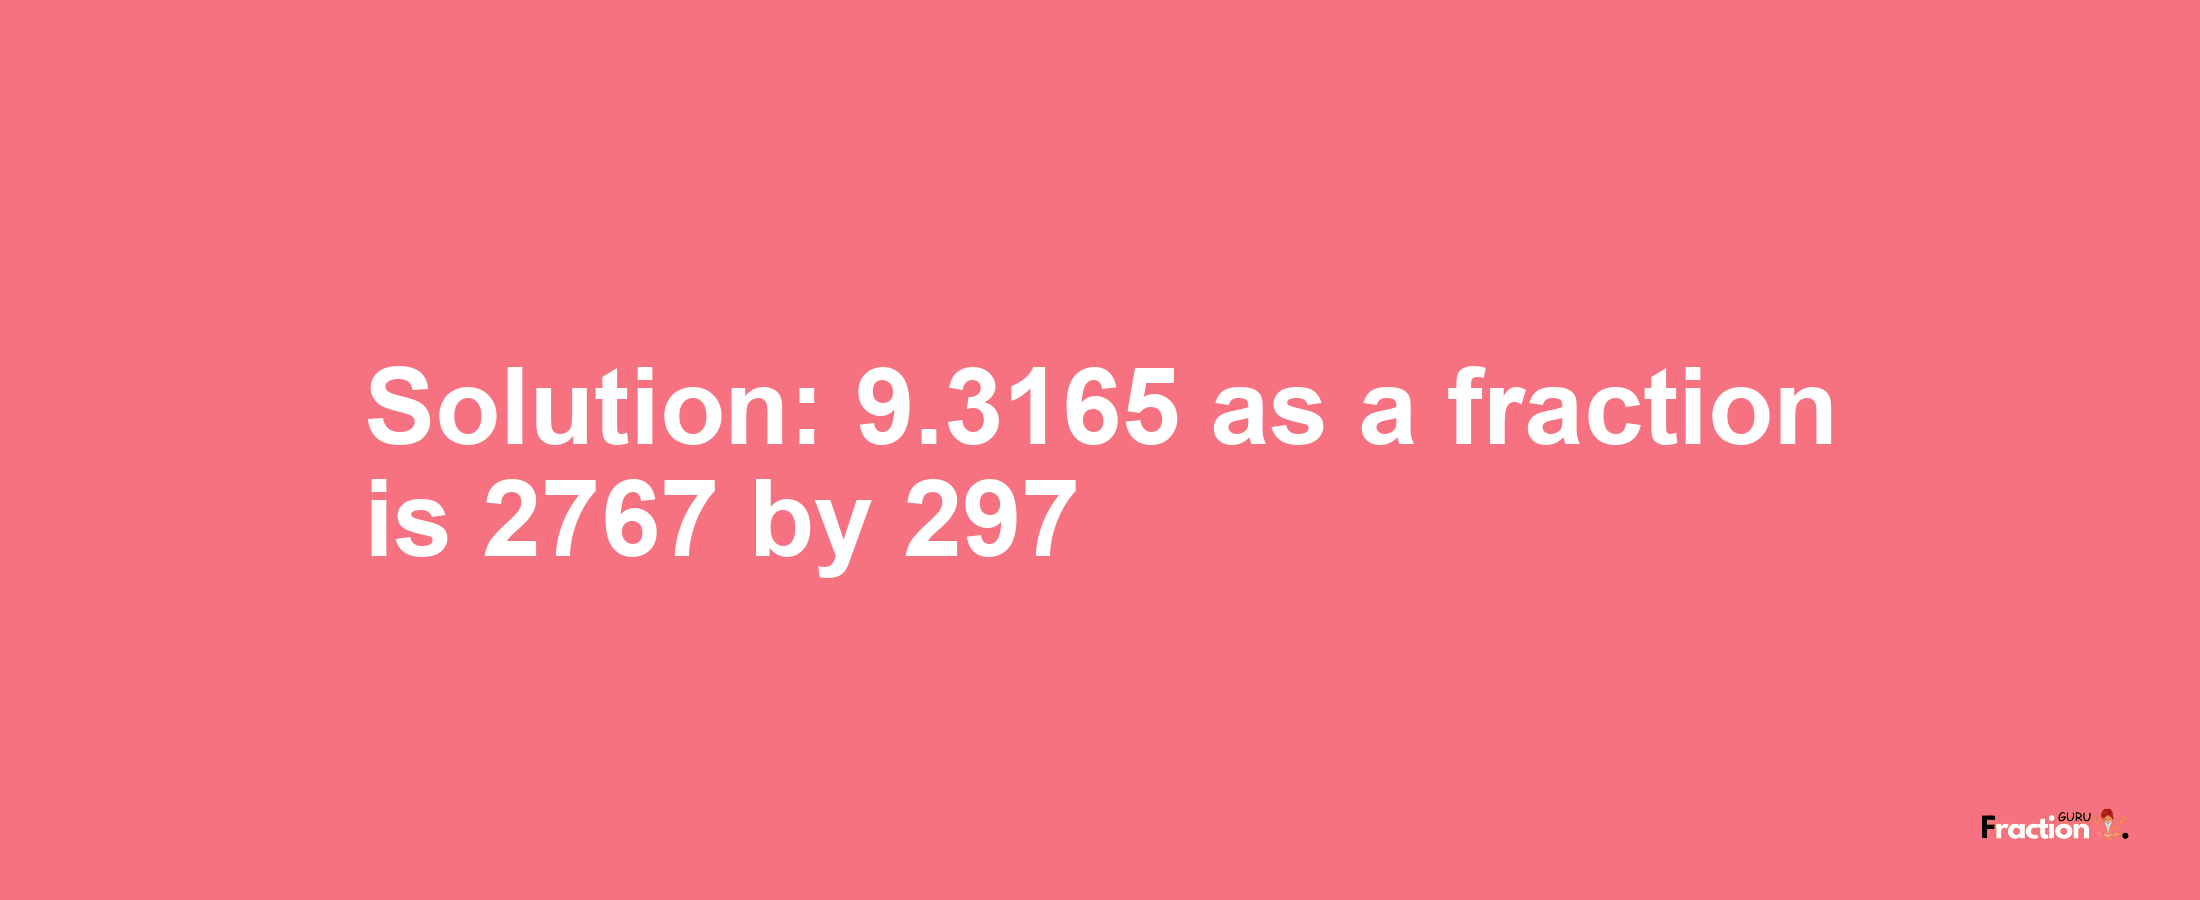 Solution:9.3165 as a fraction is 2767/297